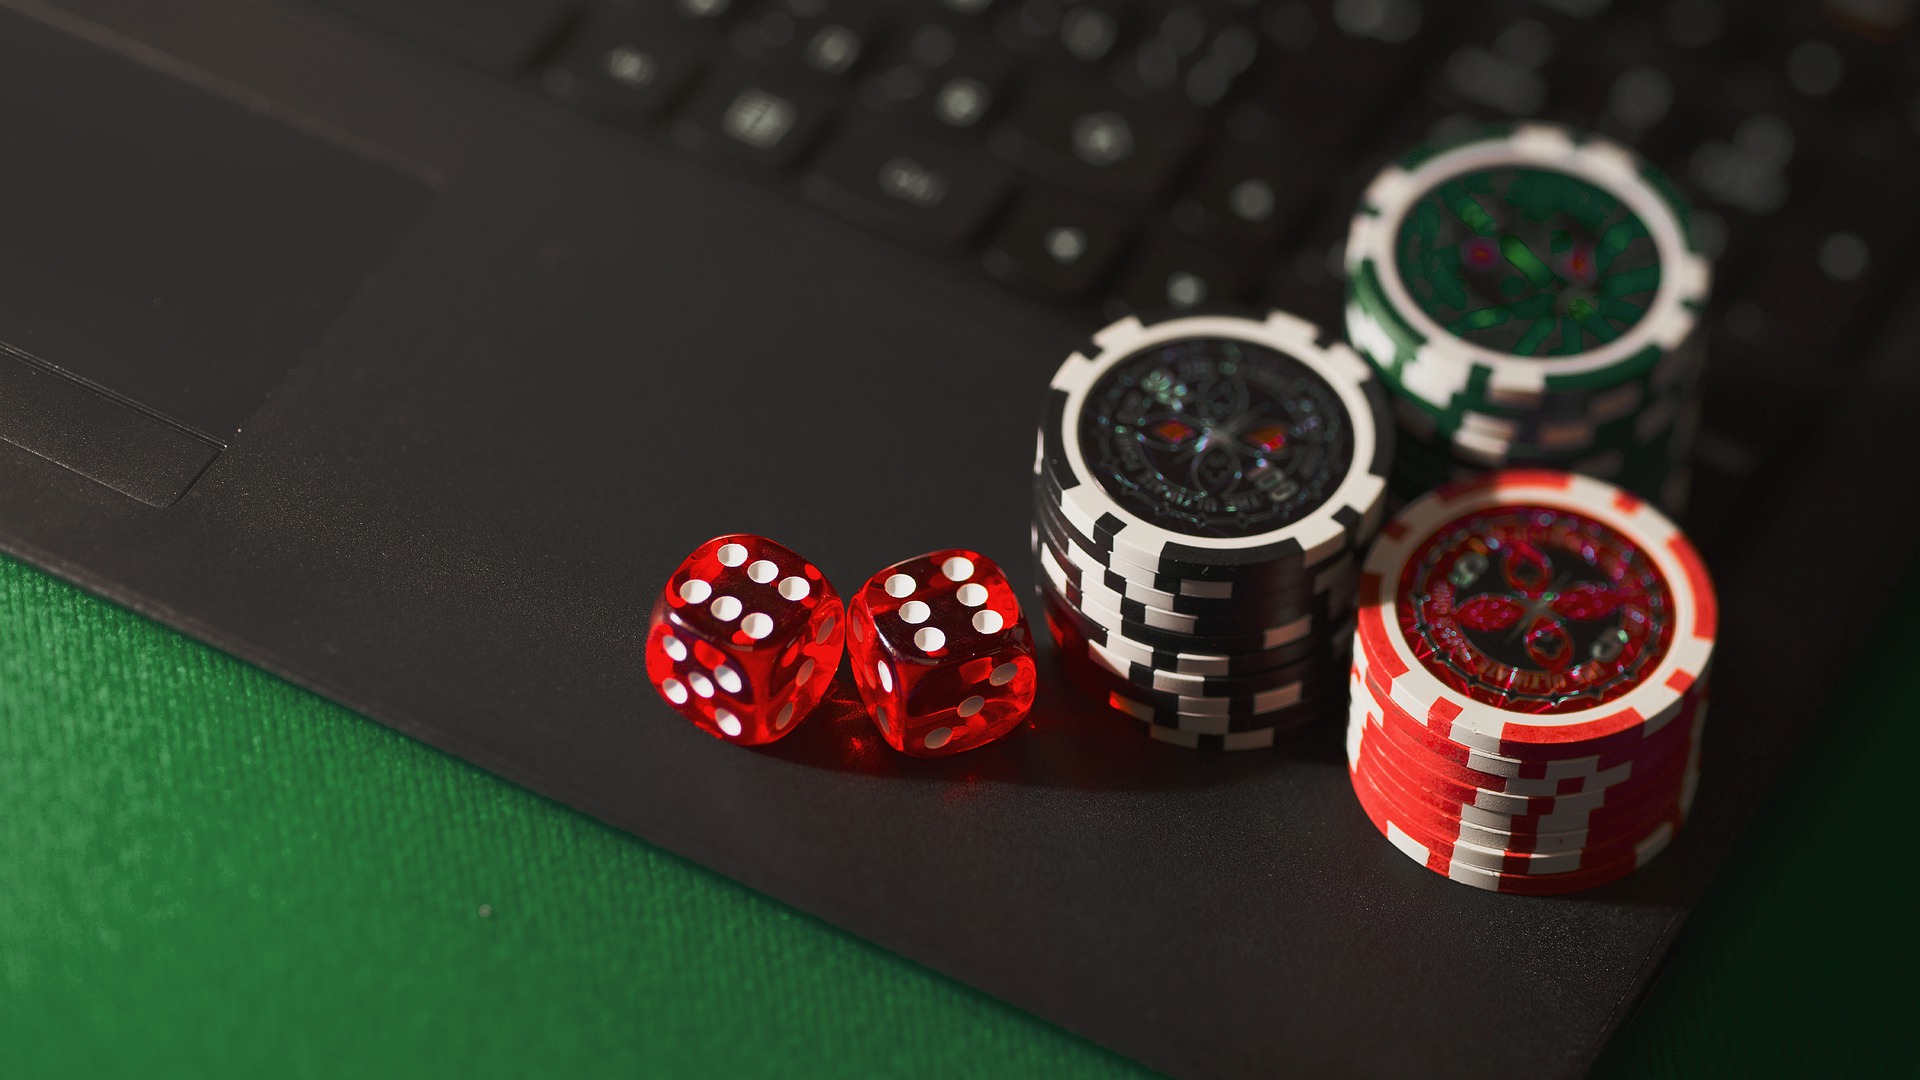 The positive facts of participating in online casinos